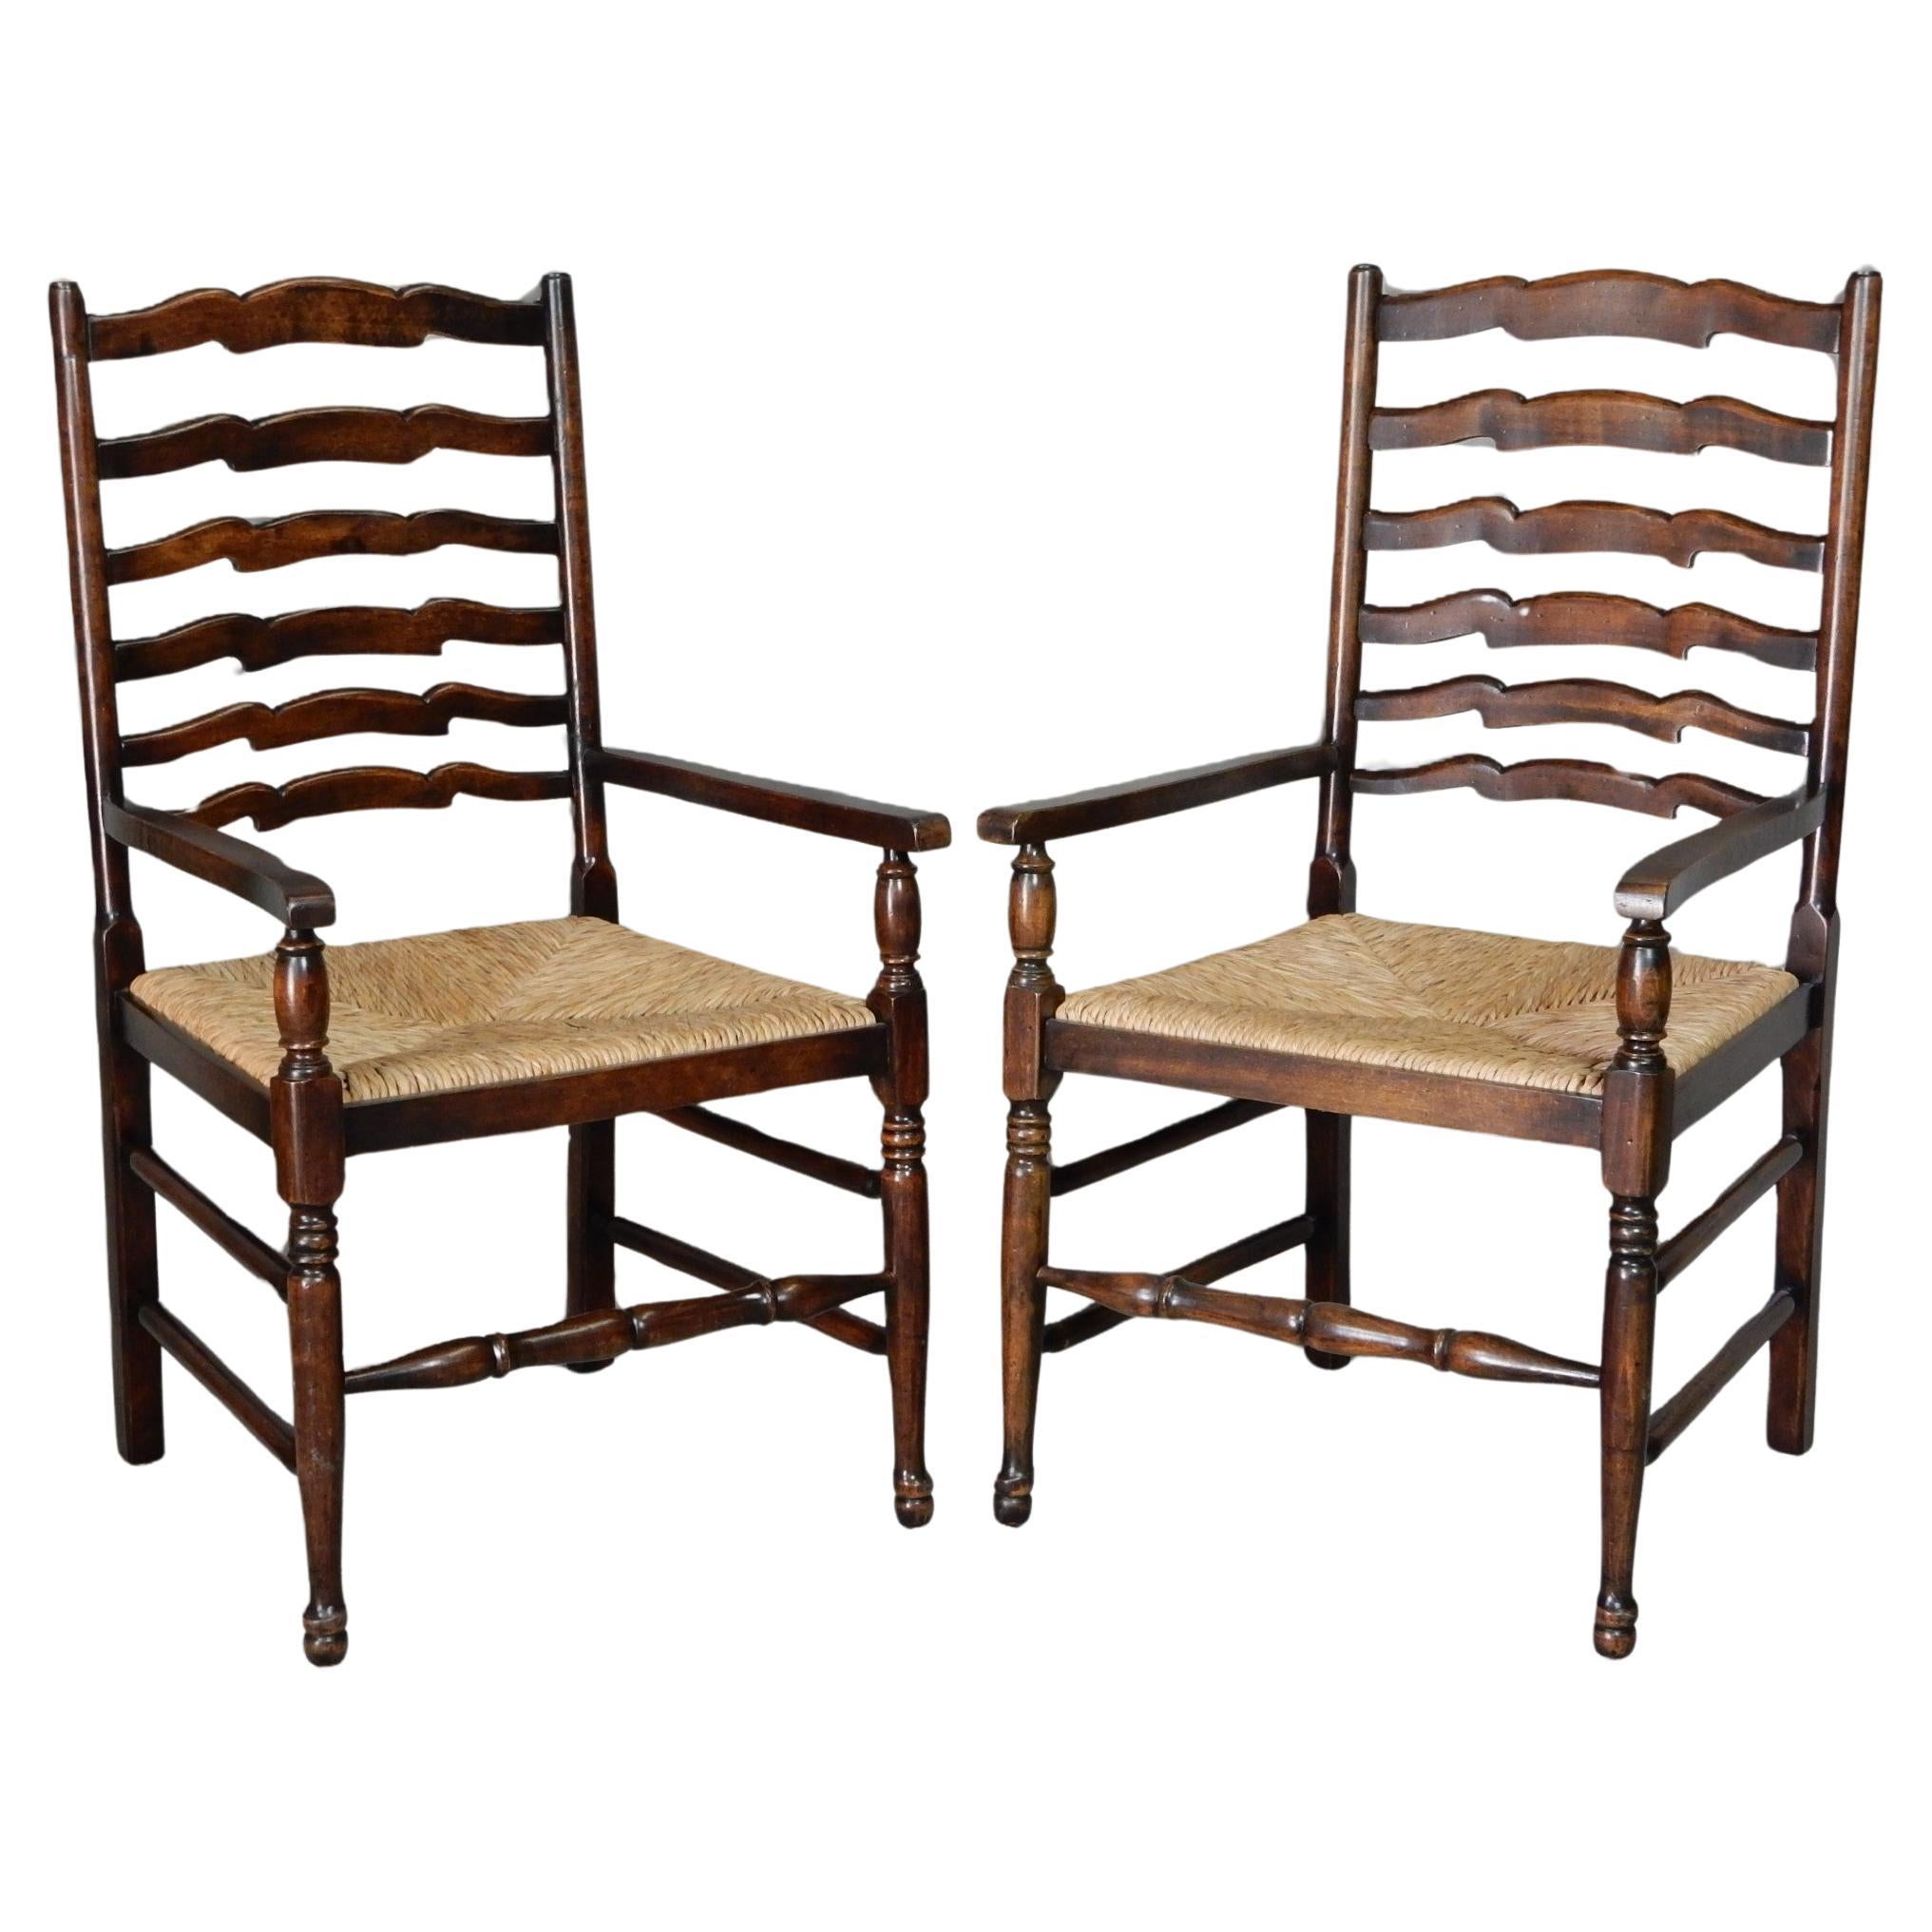 Beautiful pair of British Colonial plantation armchairs with tall ladder back and natural woven Rush seating, Circa 1960's. Oak or Mohogany.
Exceptional quality crafted chairs with no issues or damage.